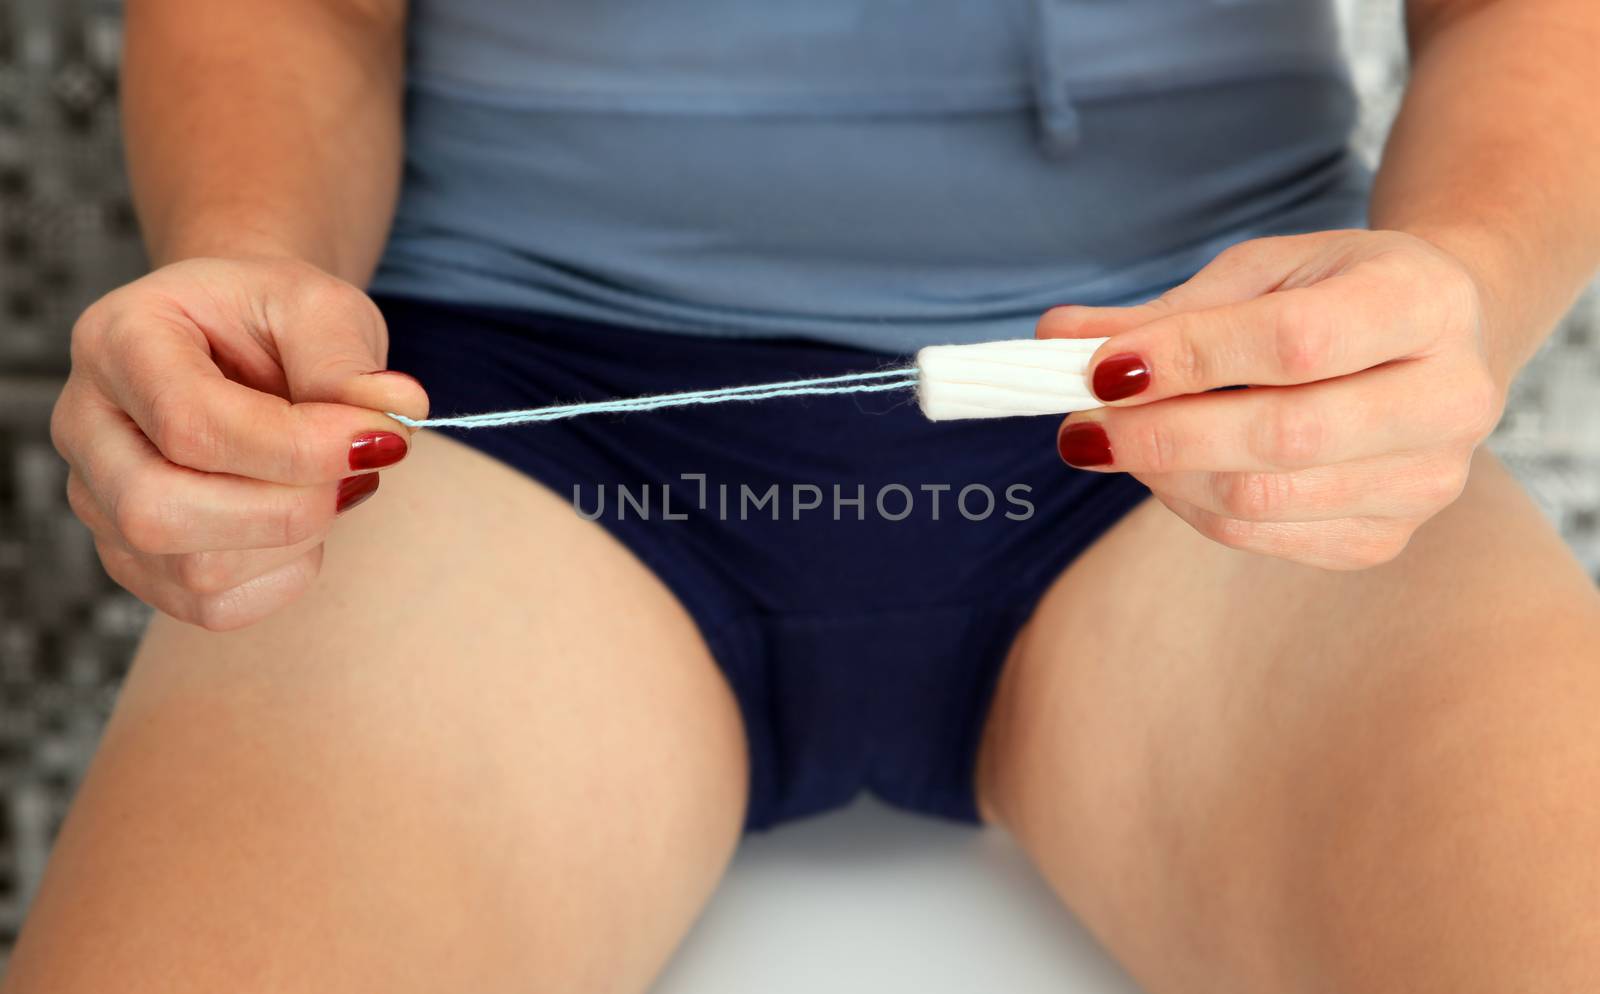 tampon in hand of woman for use at periods